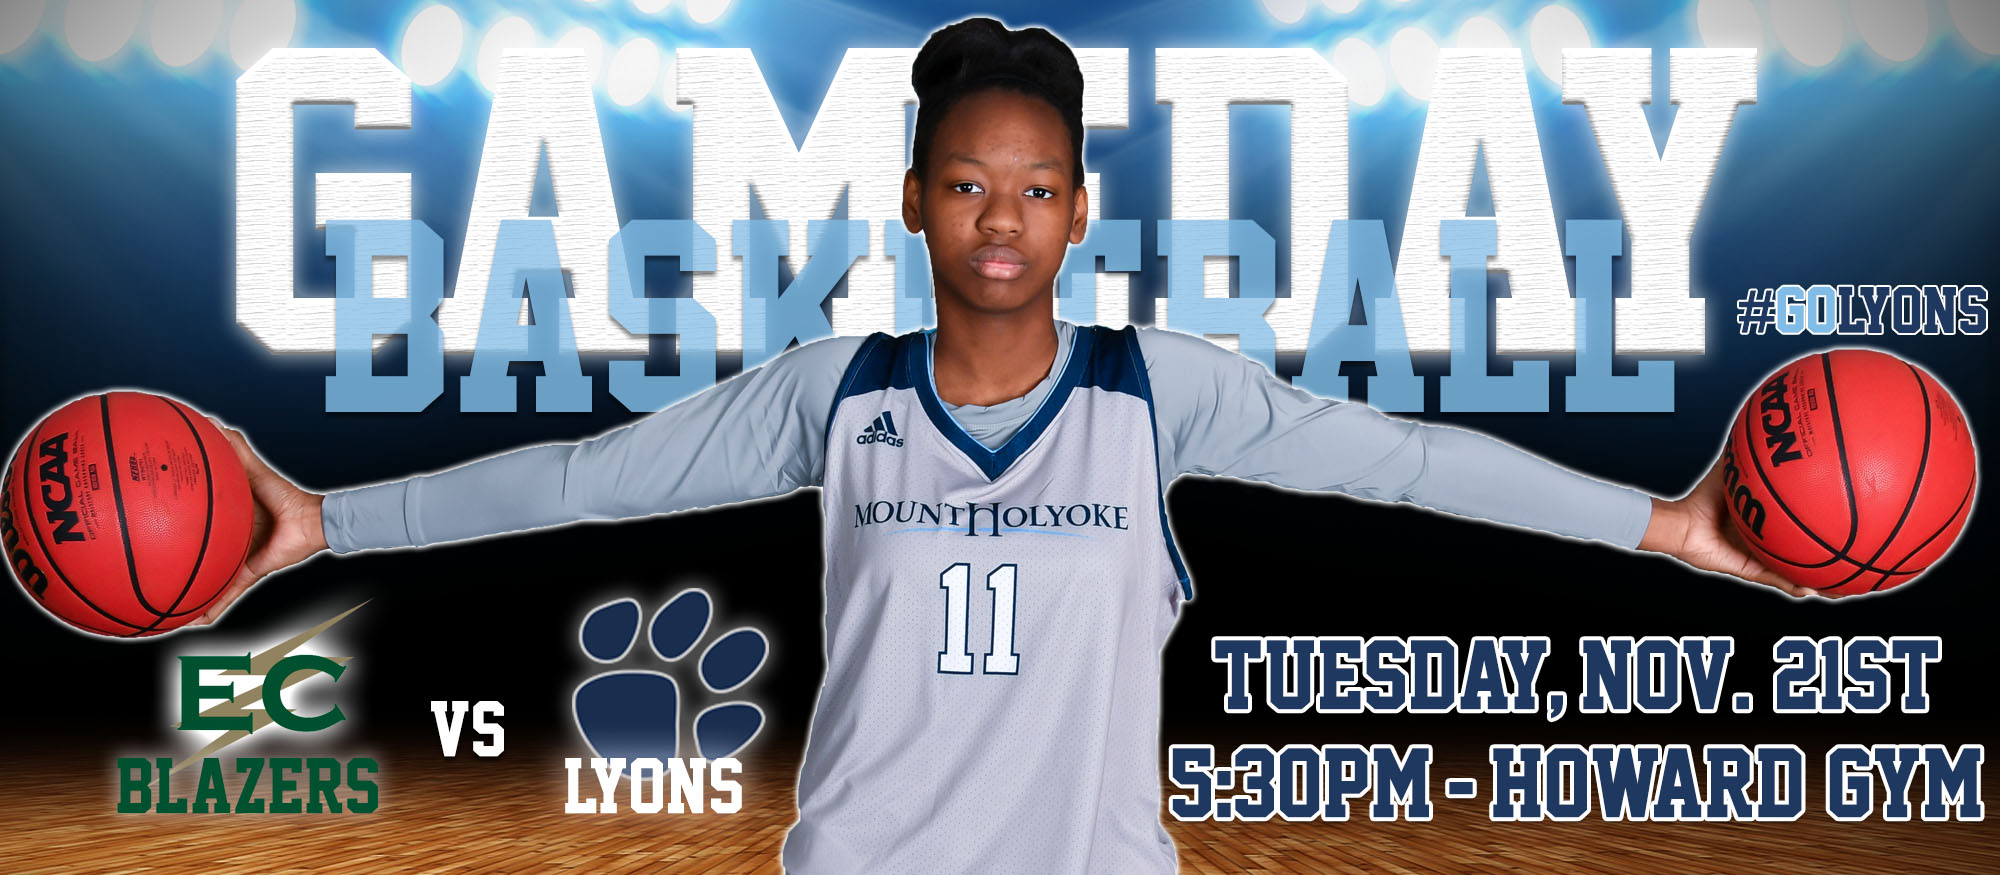 Game day graphic featuring junior basketball player and captain, Leah Hodges promoting the Tuesday, November 21st basketball game at home against Elms at 5:30pm.